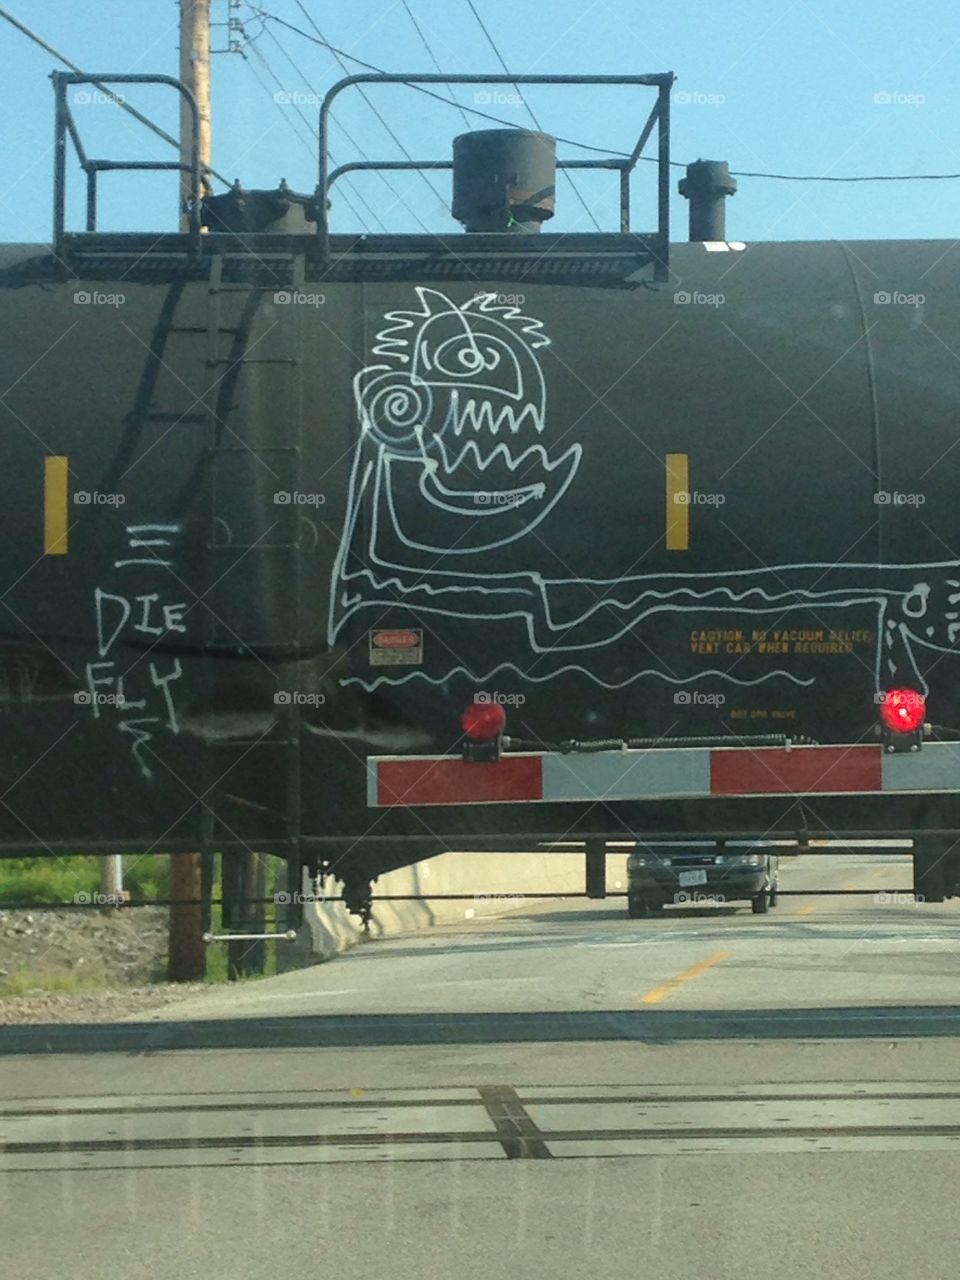 Art on the side of a train